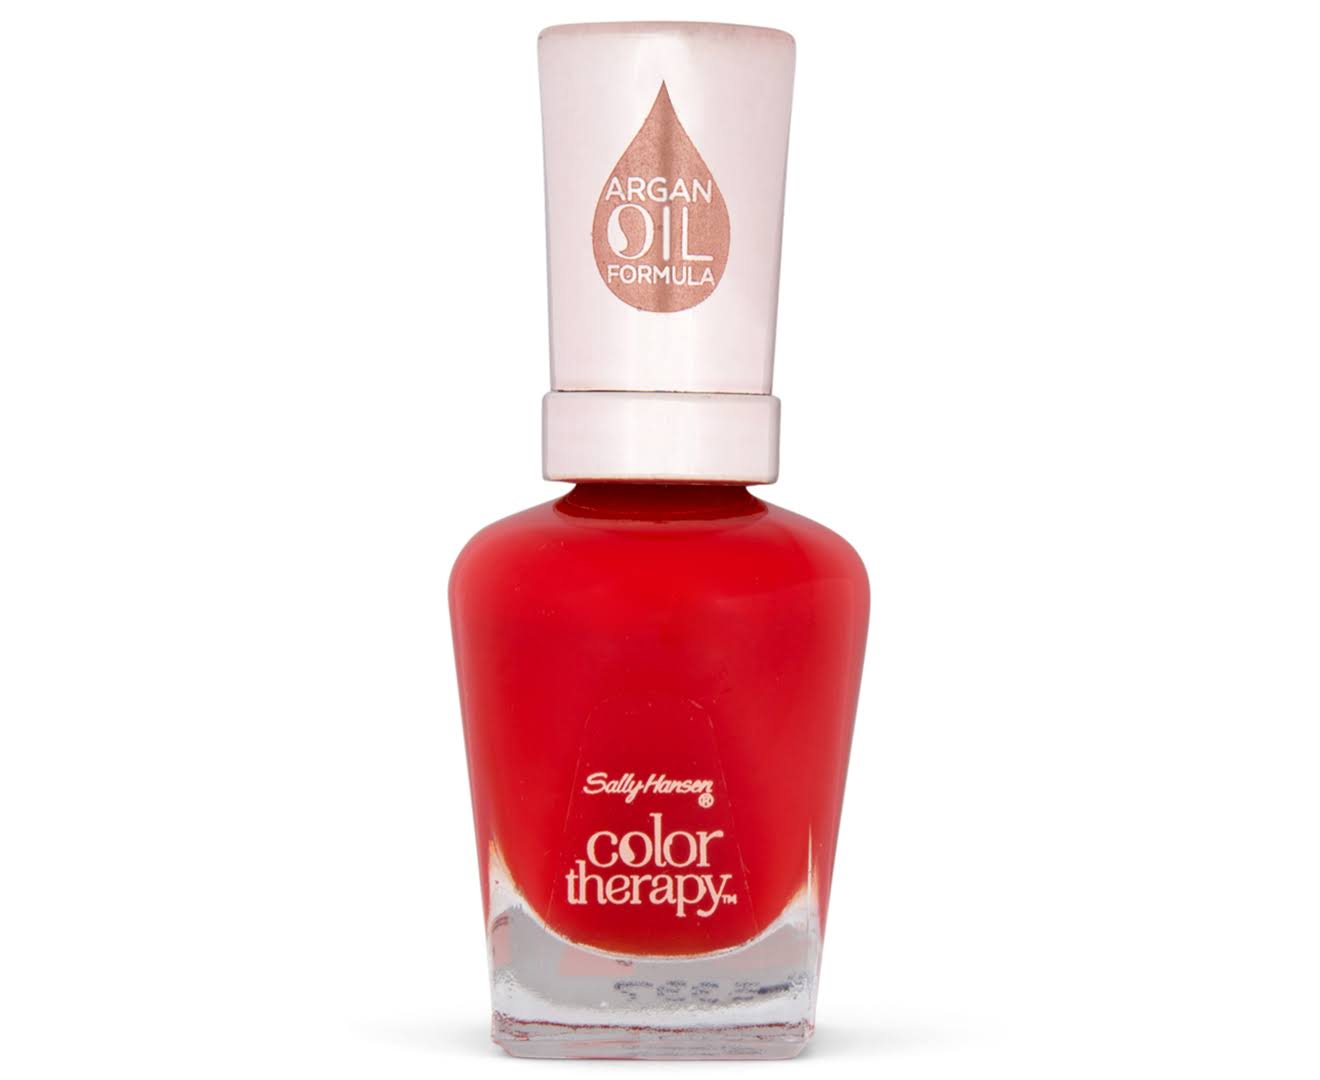 Sally Hansen Color Therapy Nail Colour - 340 Rediance,14.7ml